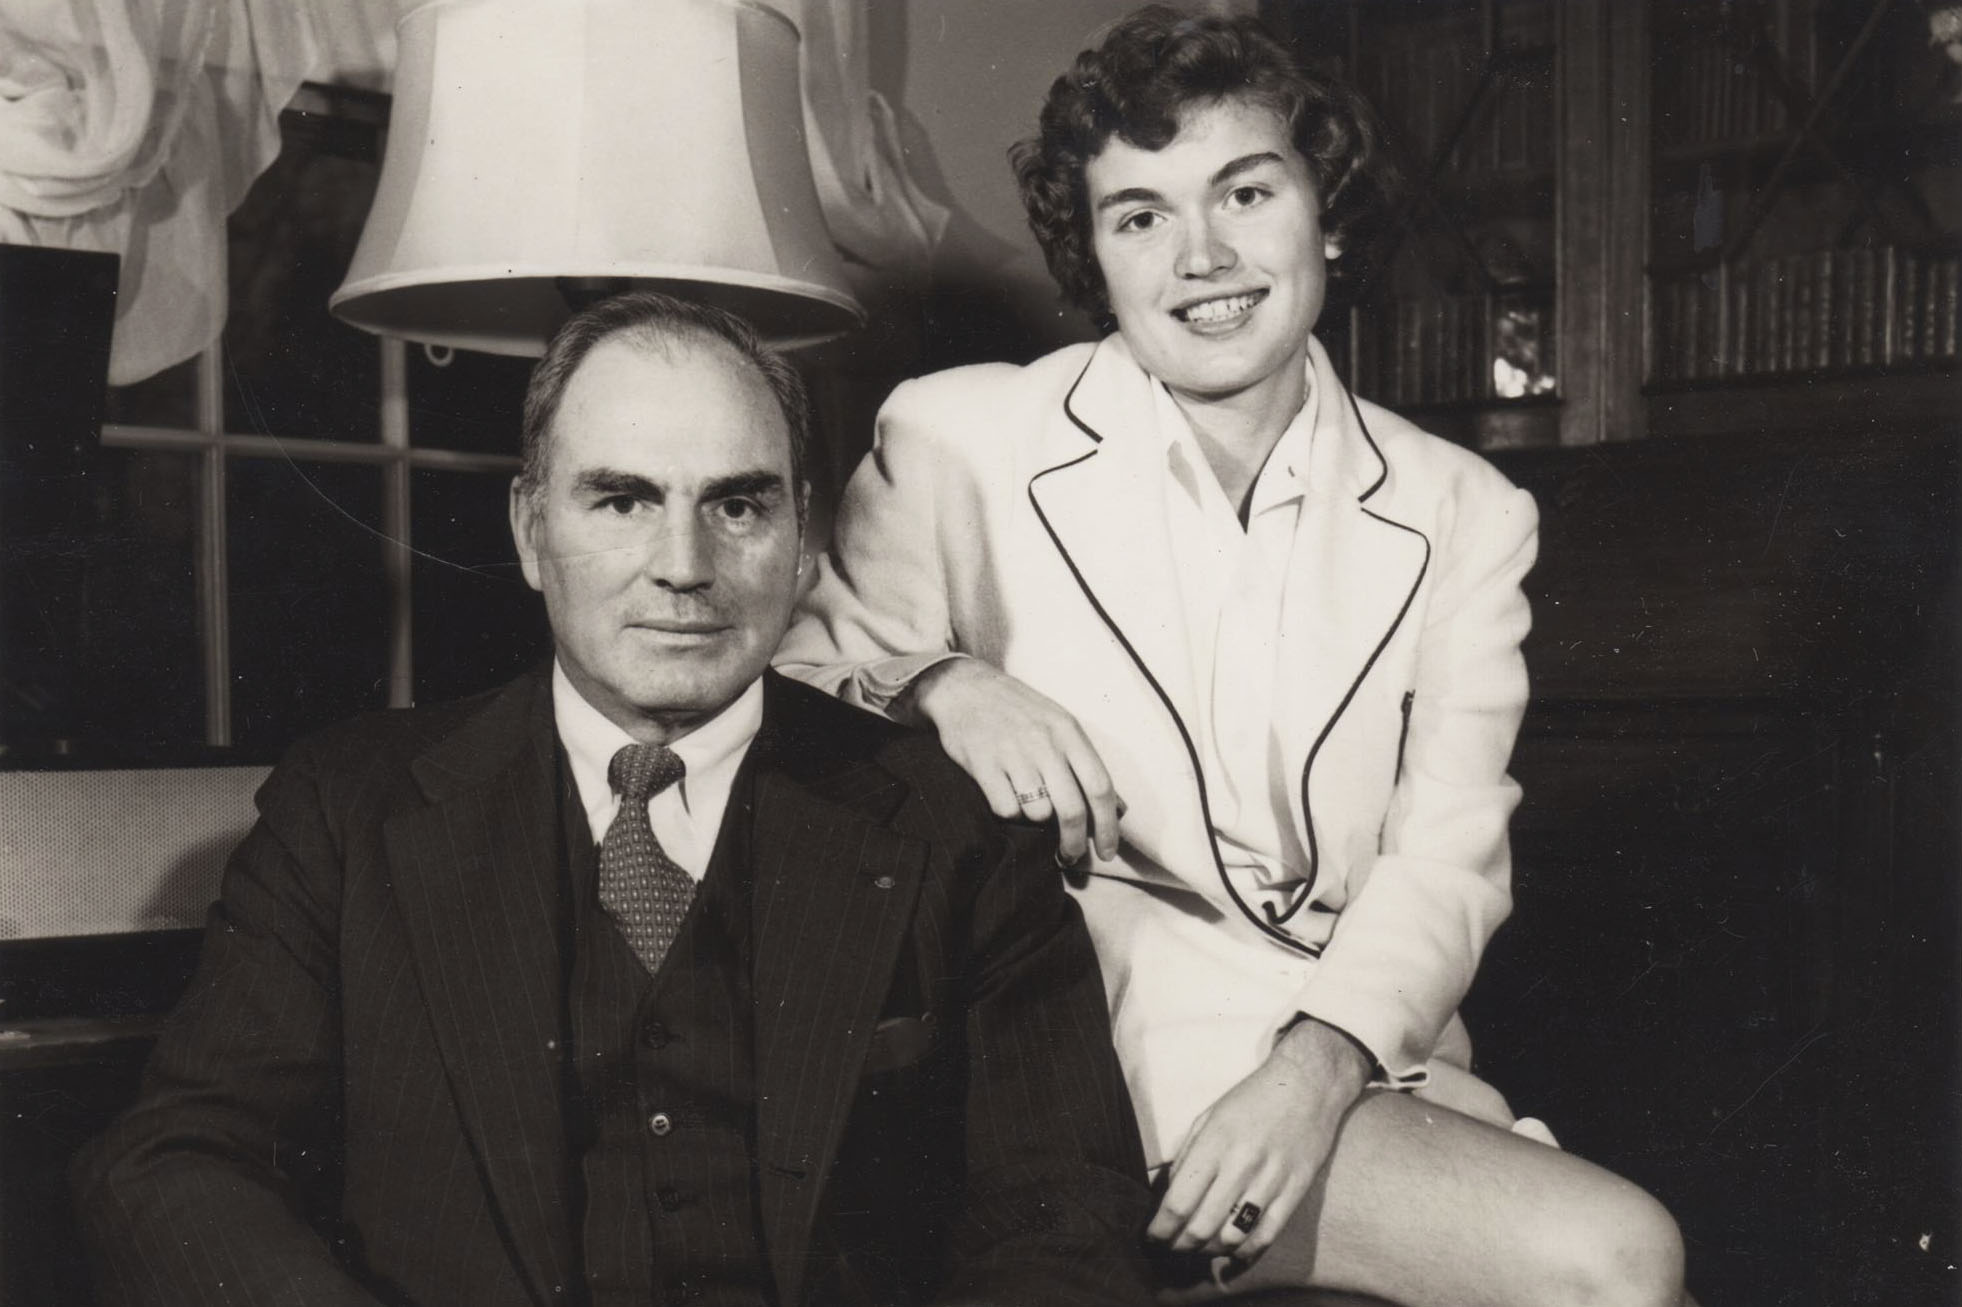 Black and white photo of Mary Slaughter and her father, Butch, sitting together on a chair looking at the camera